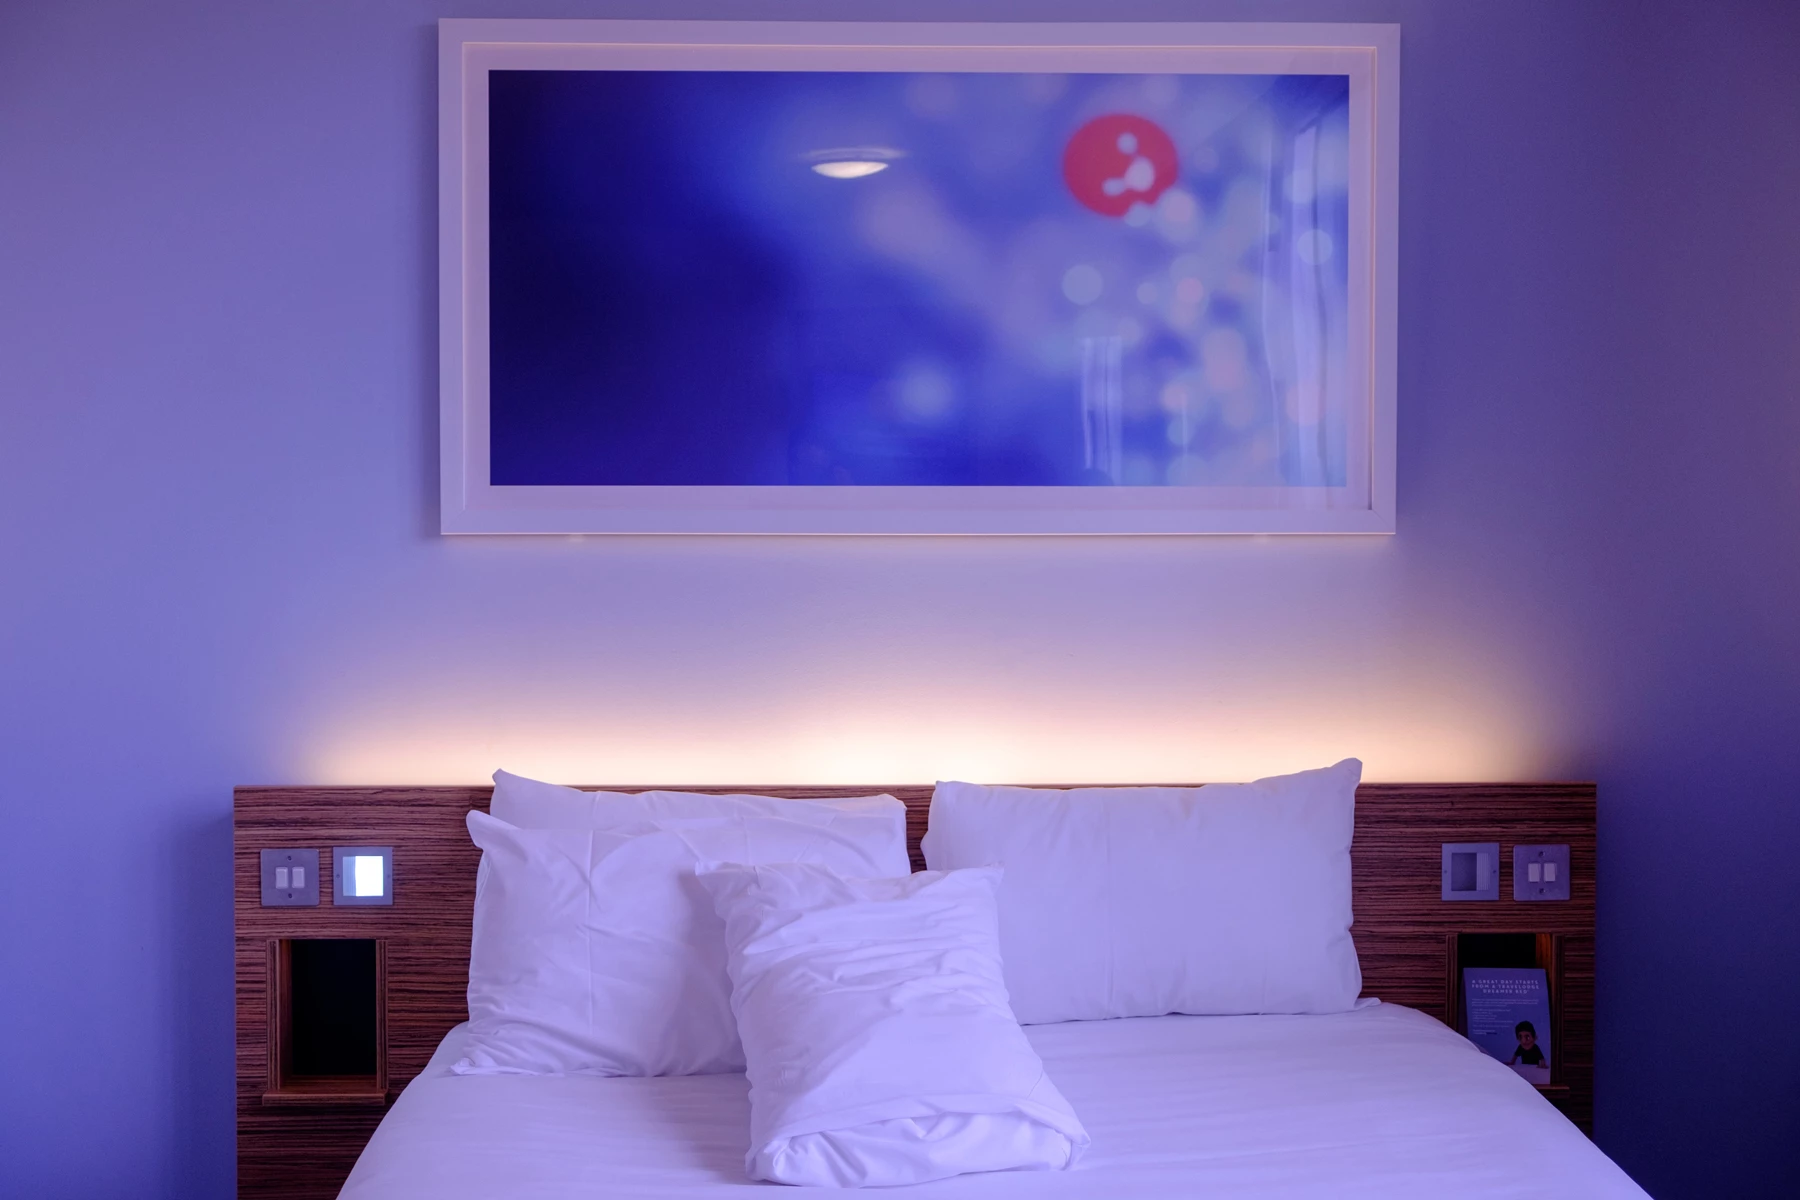 A hotel bed in a room with relaxing mood lighting set